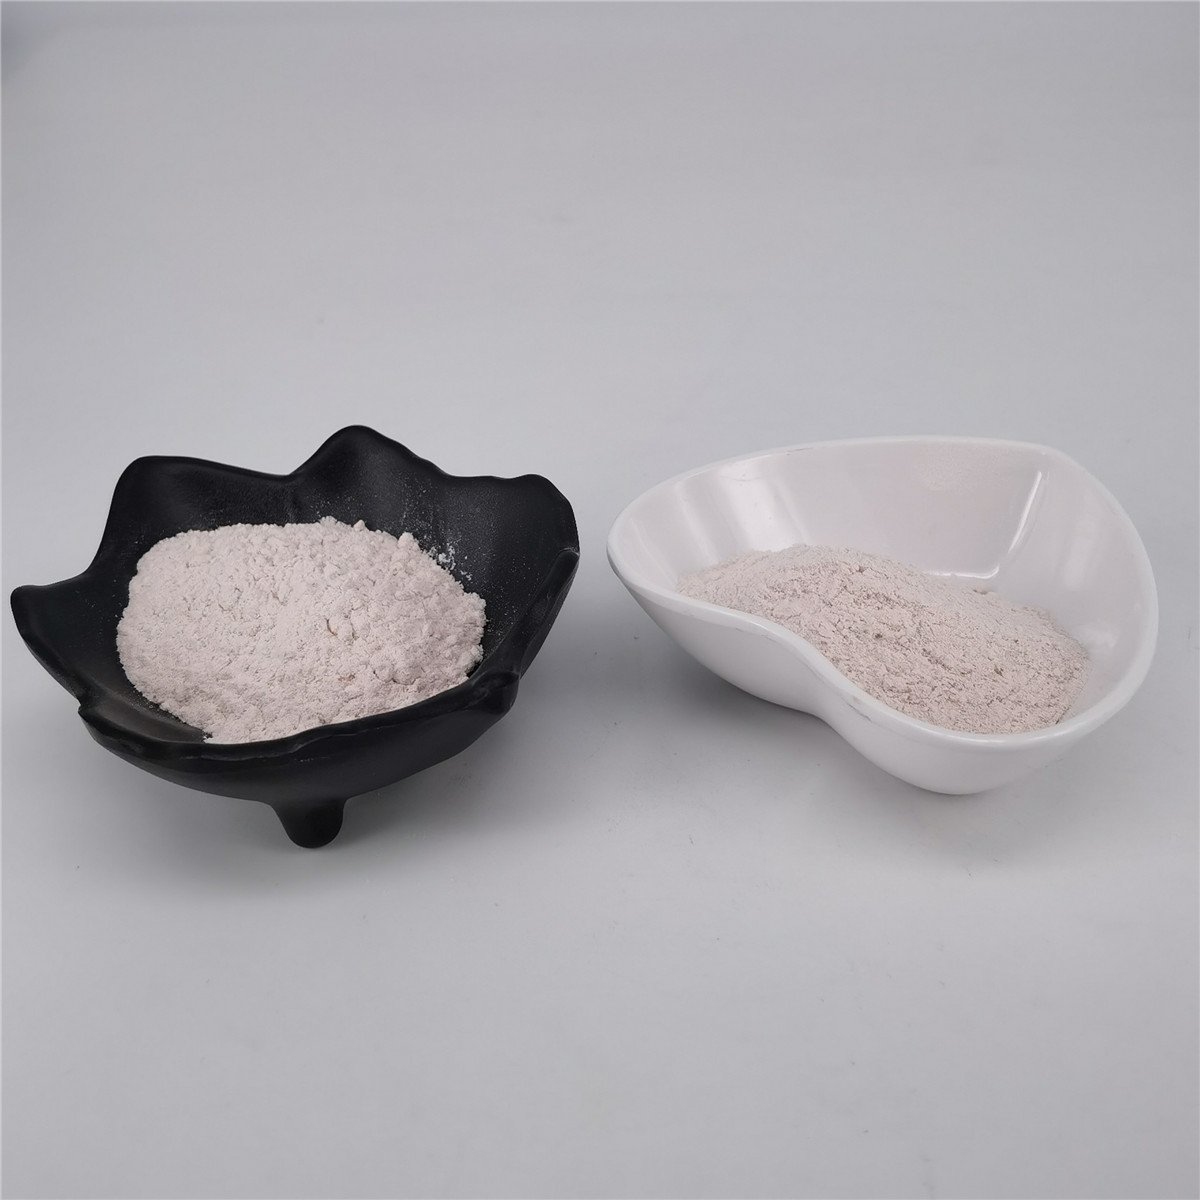  SOD Enzyme Superoxide Dismutase White Powder Anti Aging Material Manufactures